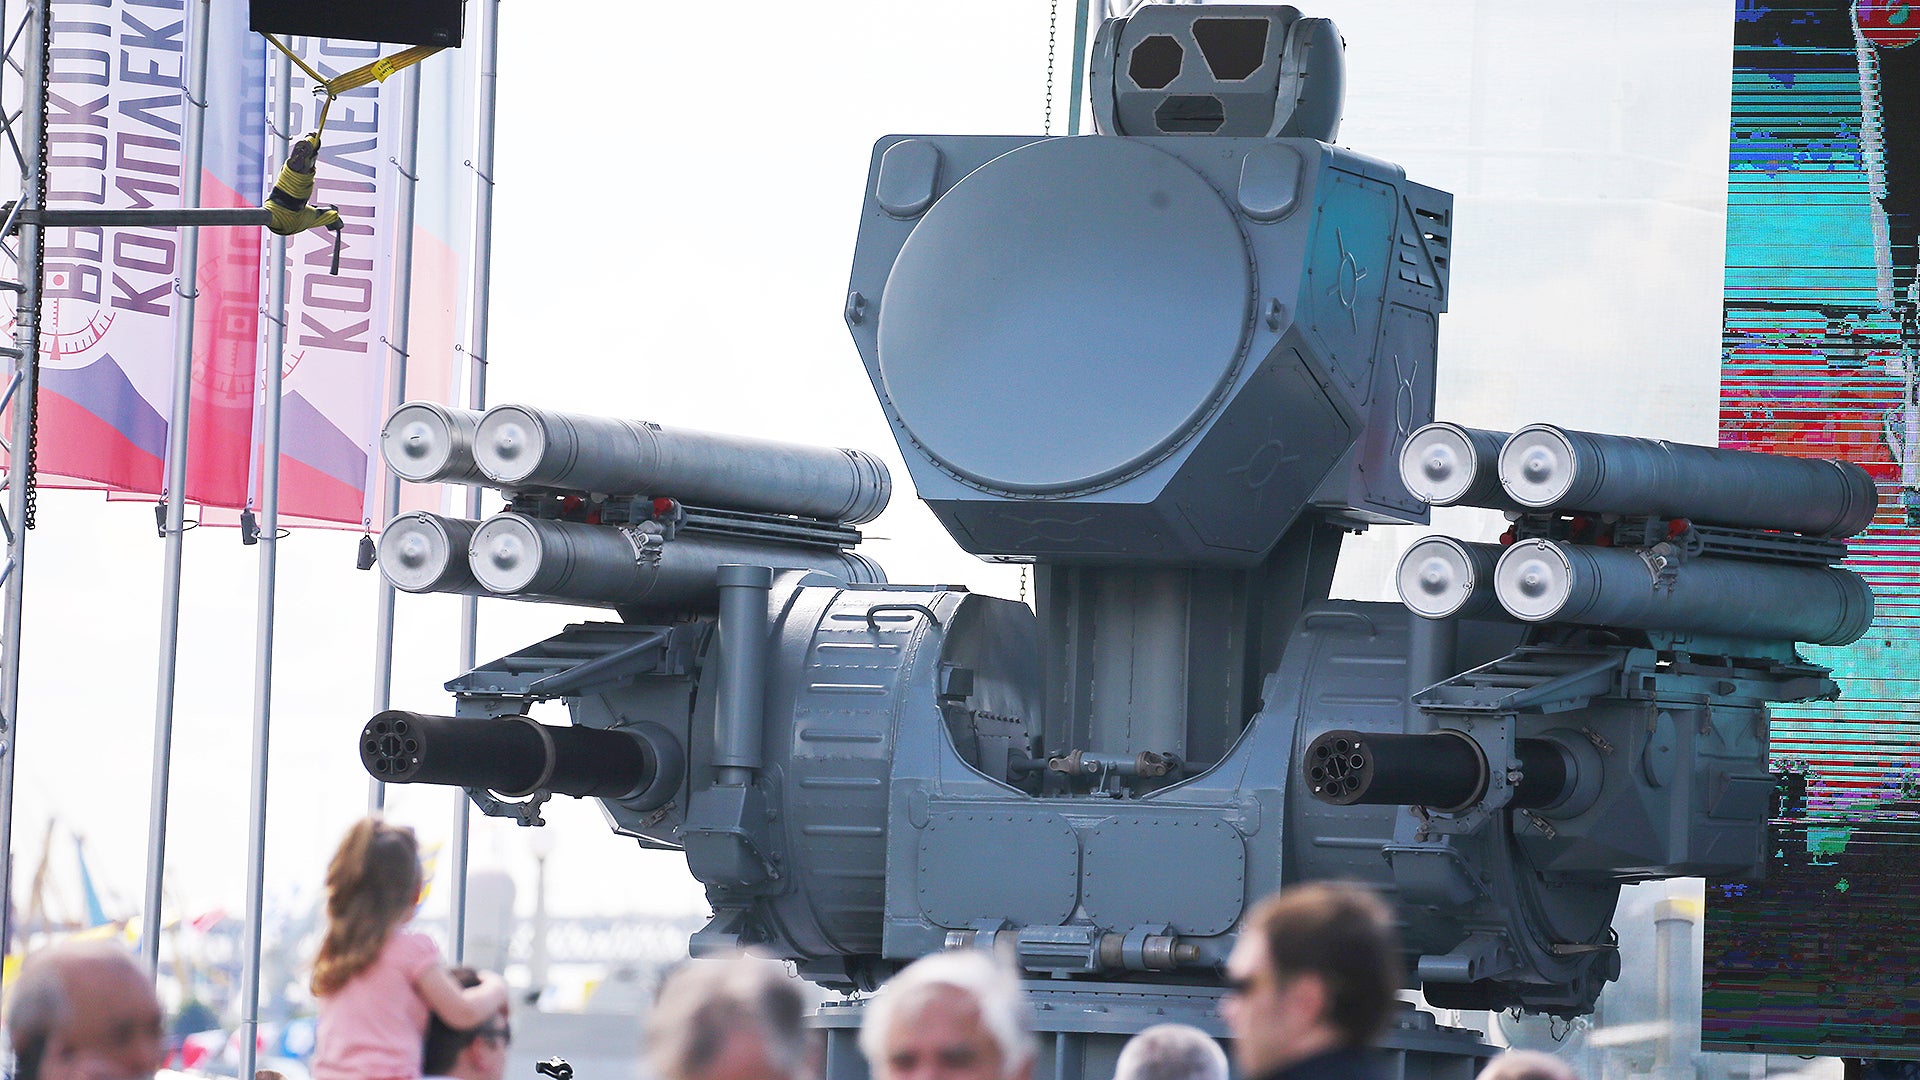 Russia To Begin Testing Its Fearsome New “Pantsir-ME” Naval Close-In Defense System